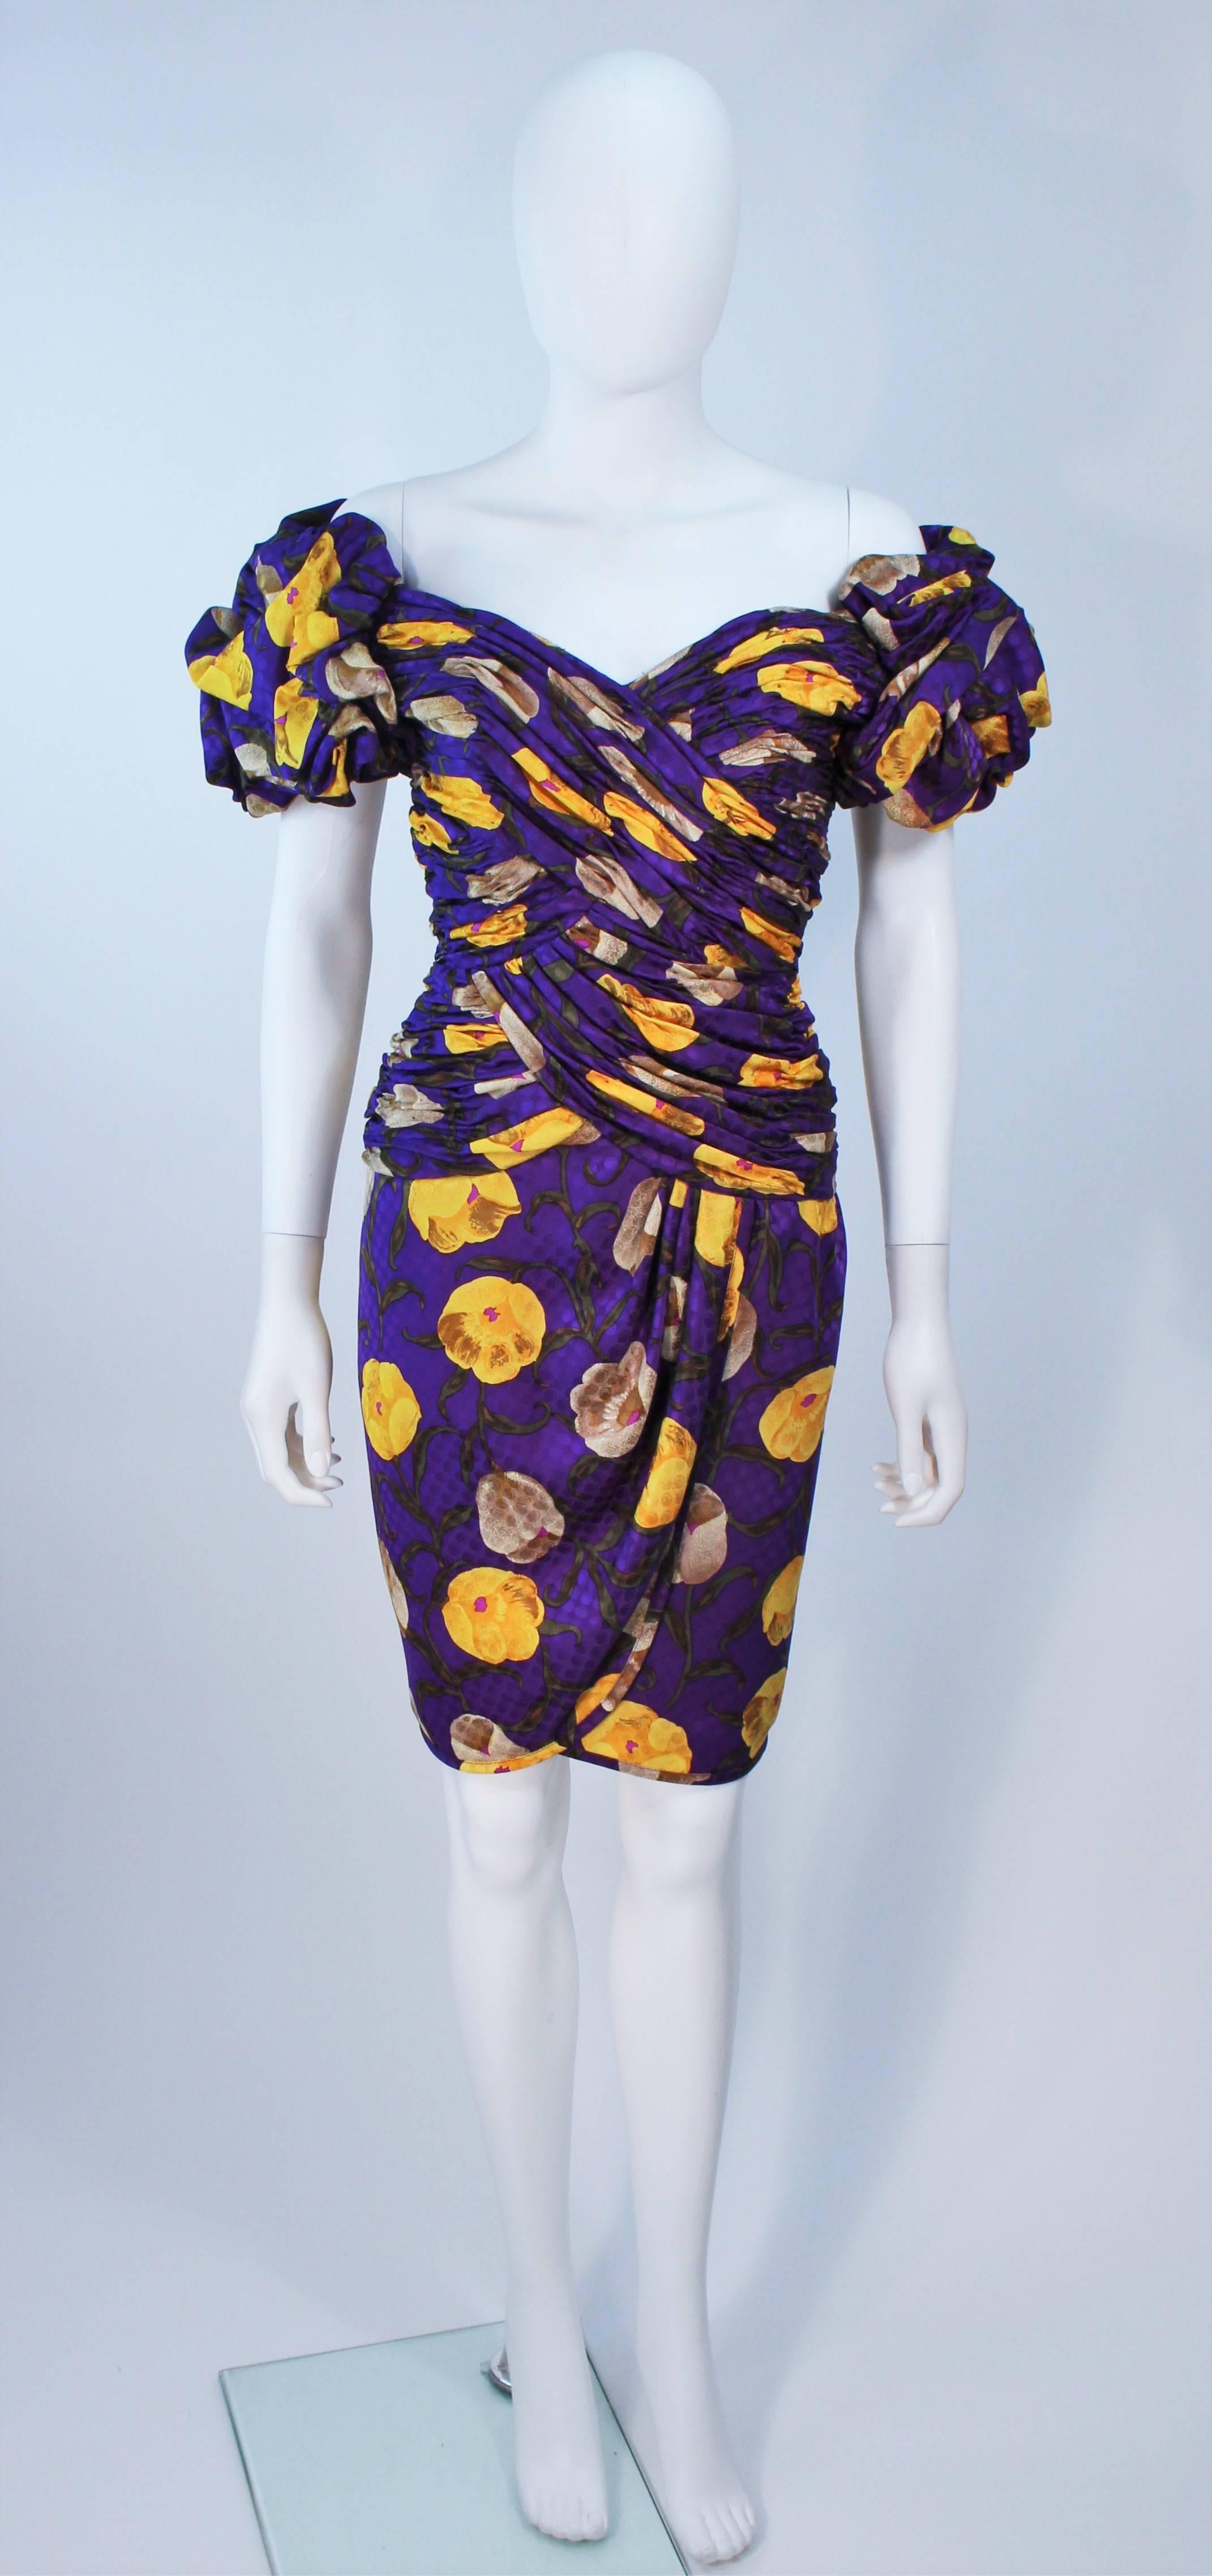  This Lian Carlo cocktail dress is composed of a purple silk with yellow accents in a floral print. Features a ruched bodice. There are ruffled sleeves and a center back zipper. In excellent vintage condition. 

**Please cross-reference